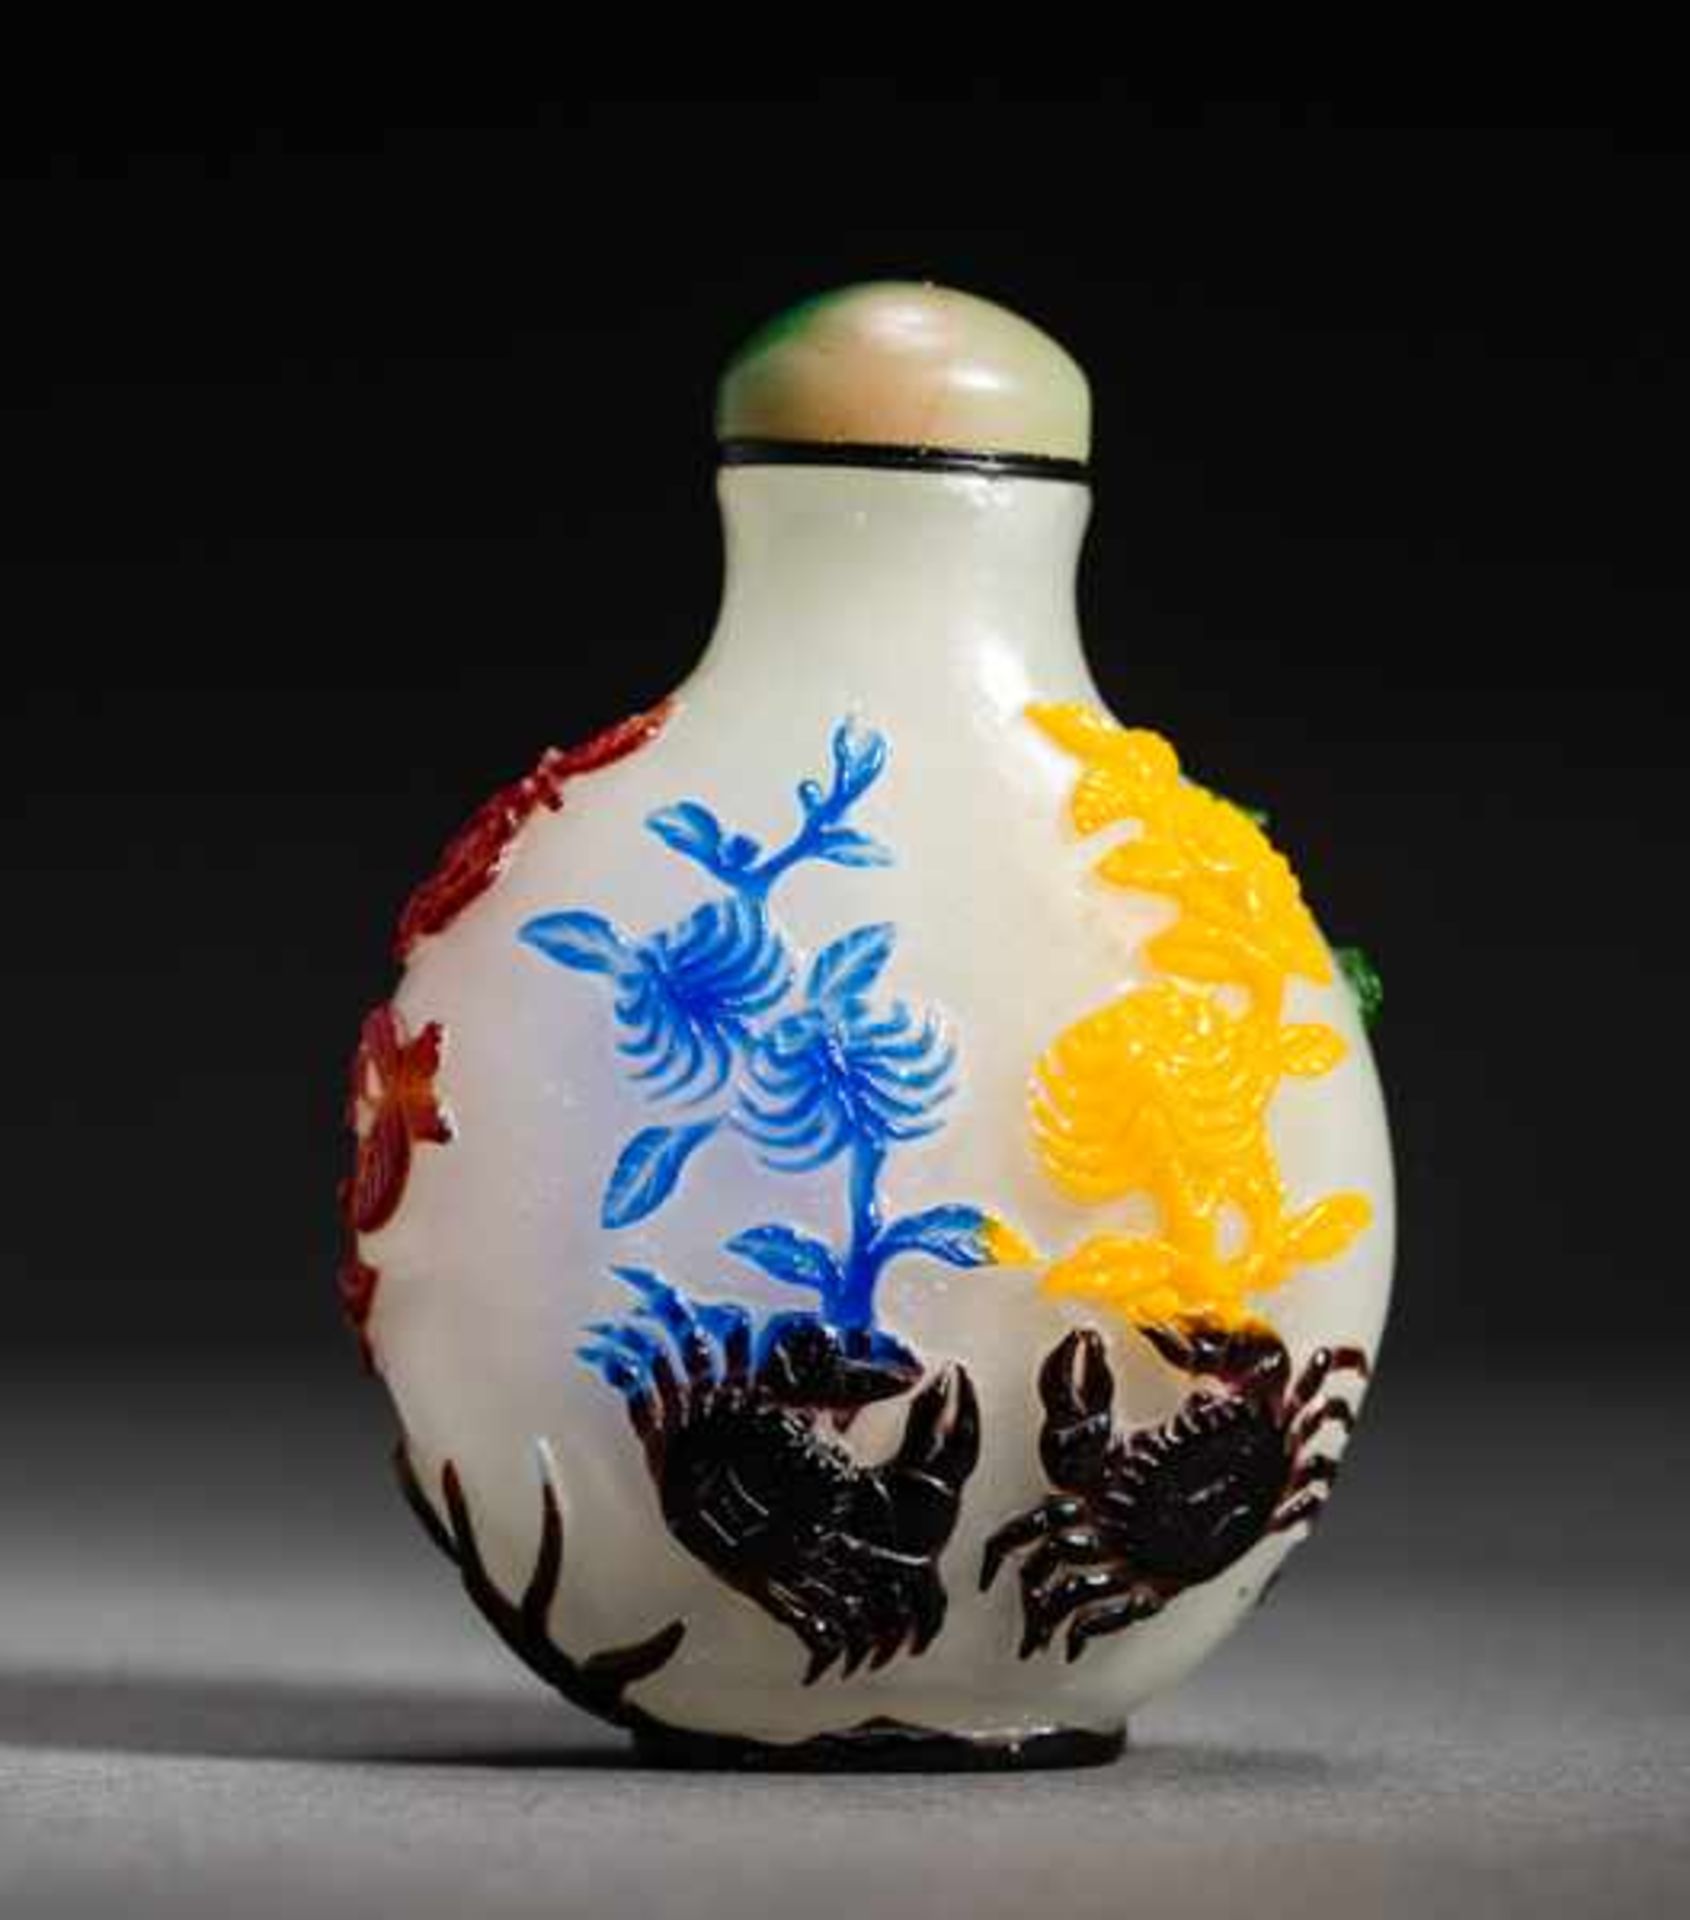 BLOSSOMS, PAVILION, FROGS AND CRABS Colored cameo glass. Stopper: Jade, ivory spoon. China, Round - Image 2 of 7